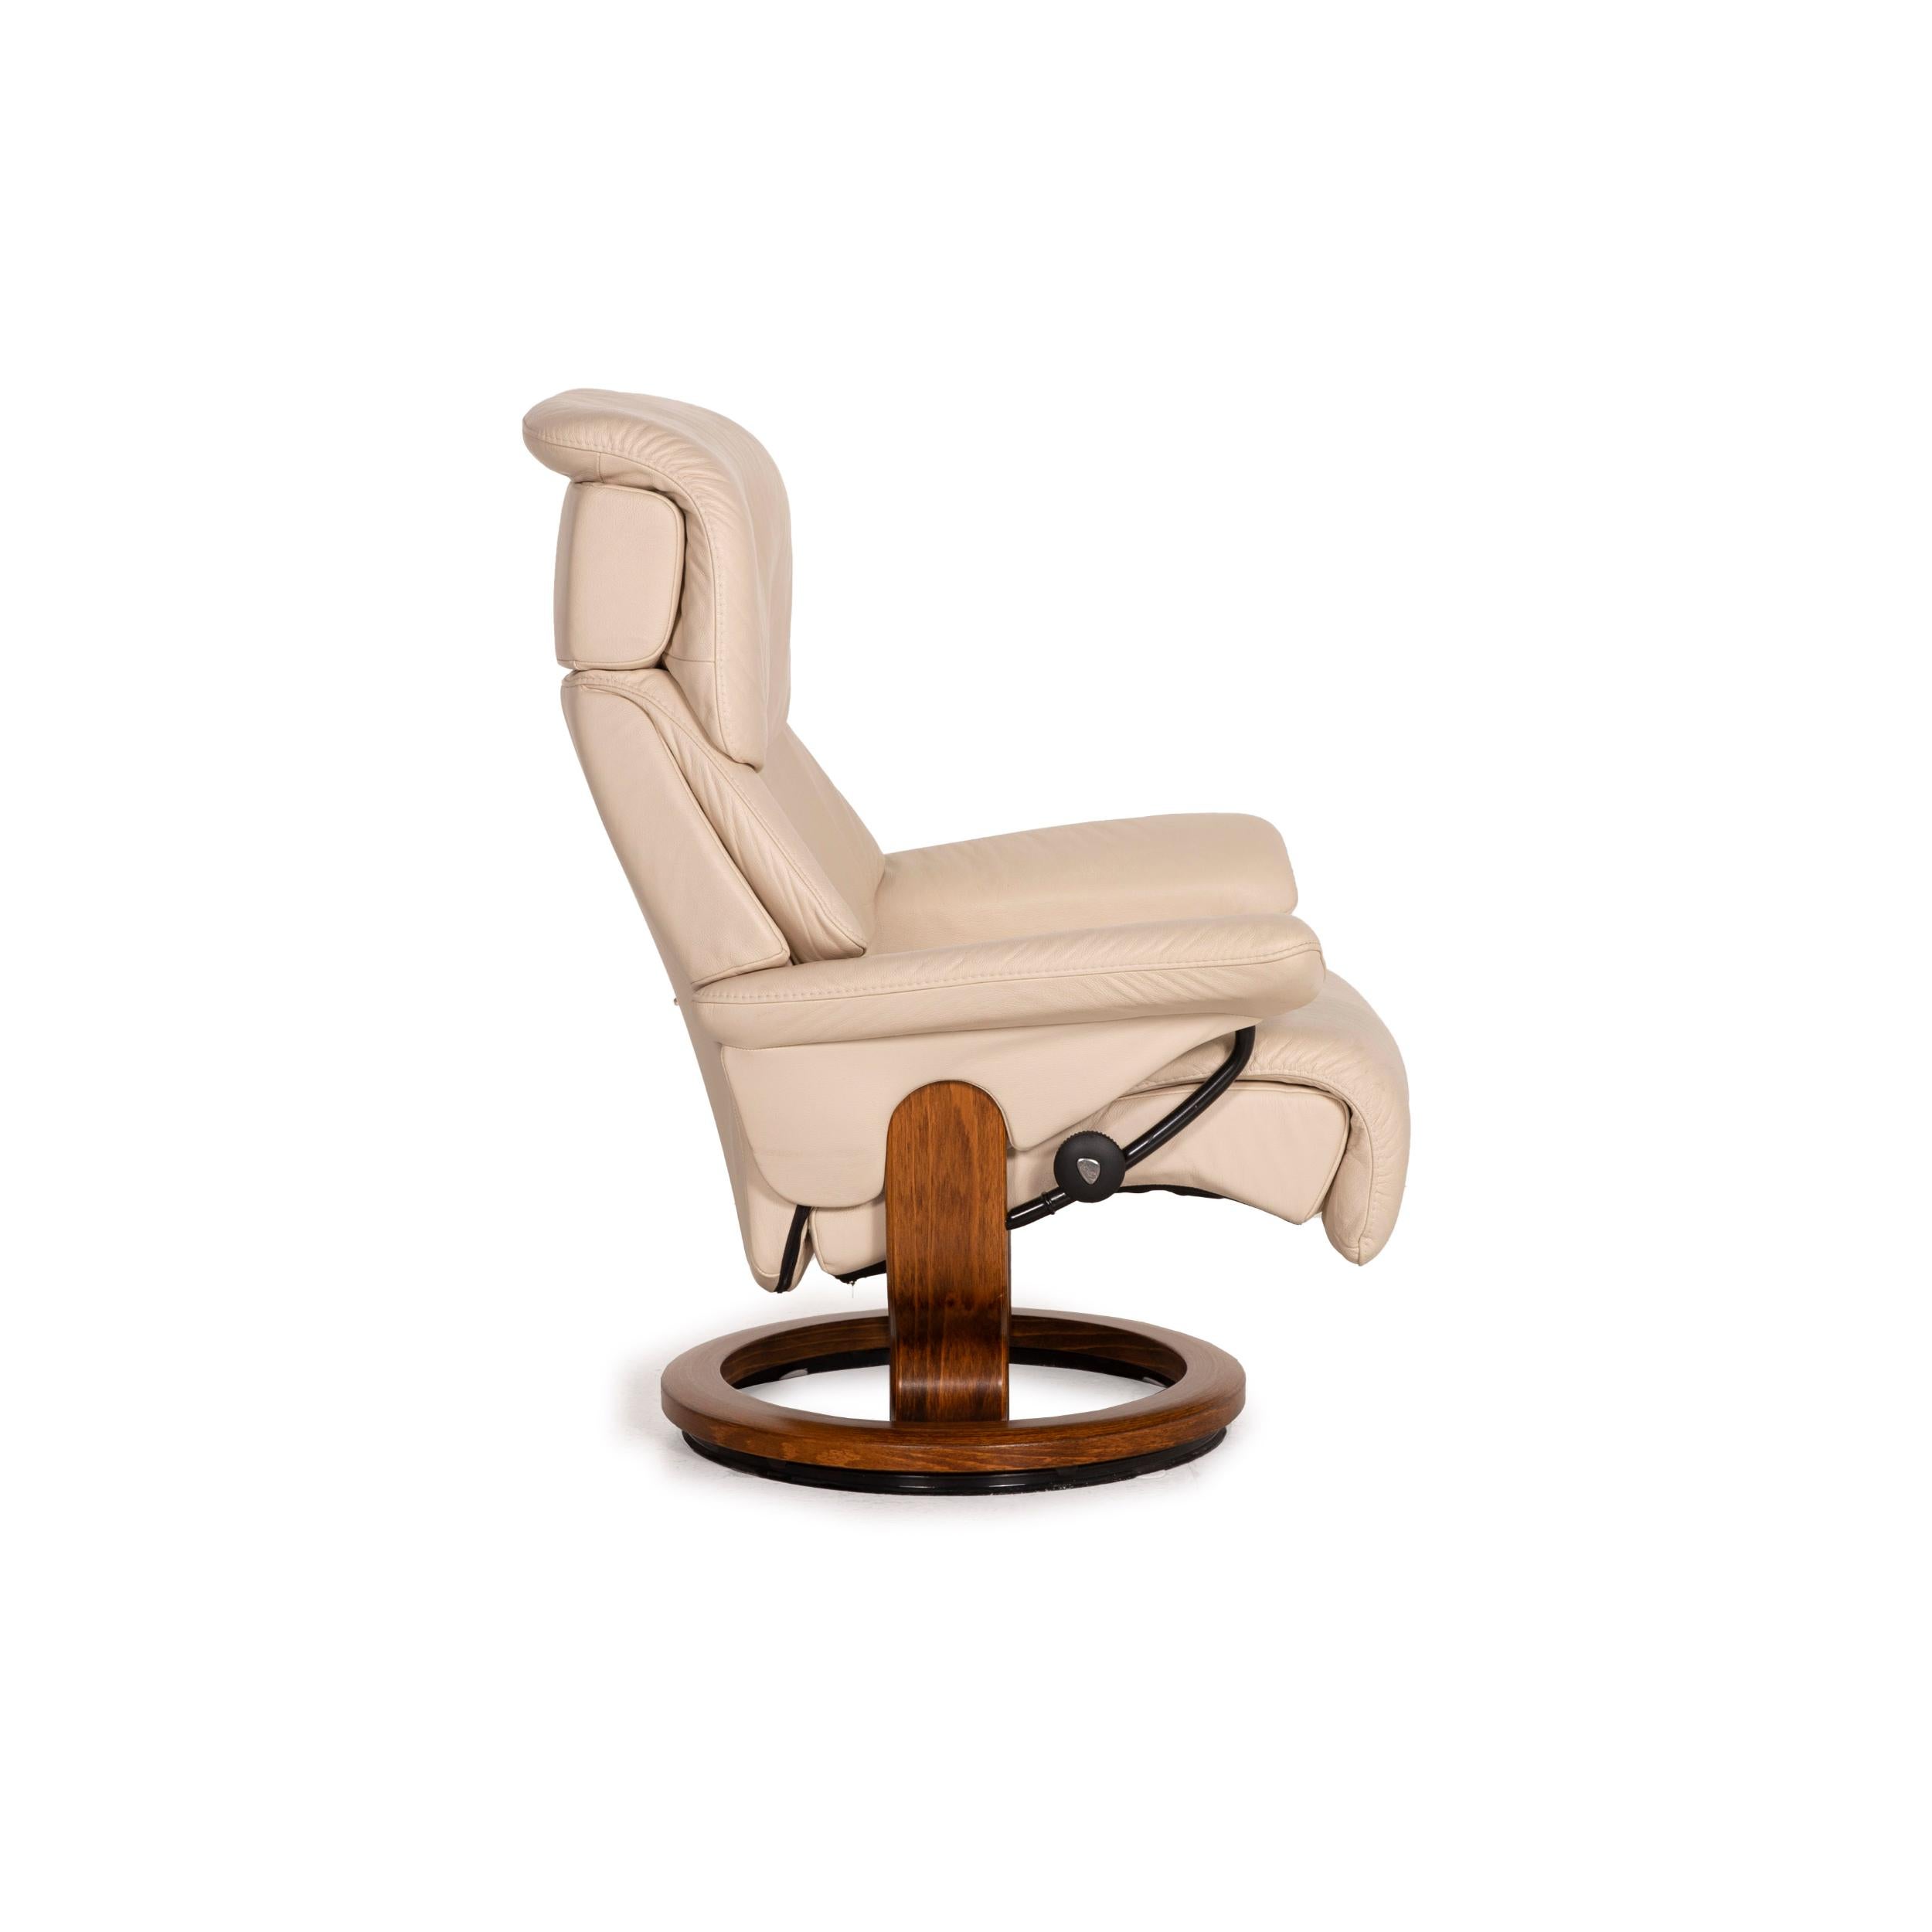 Stressless Vision Leather Armchair Cream Incl. Stool Relaxation Function 4